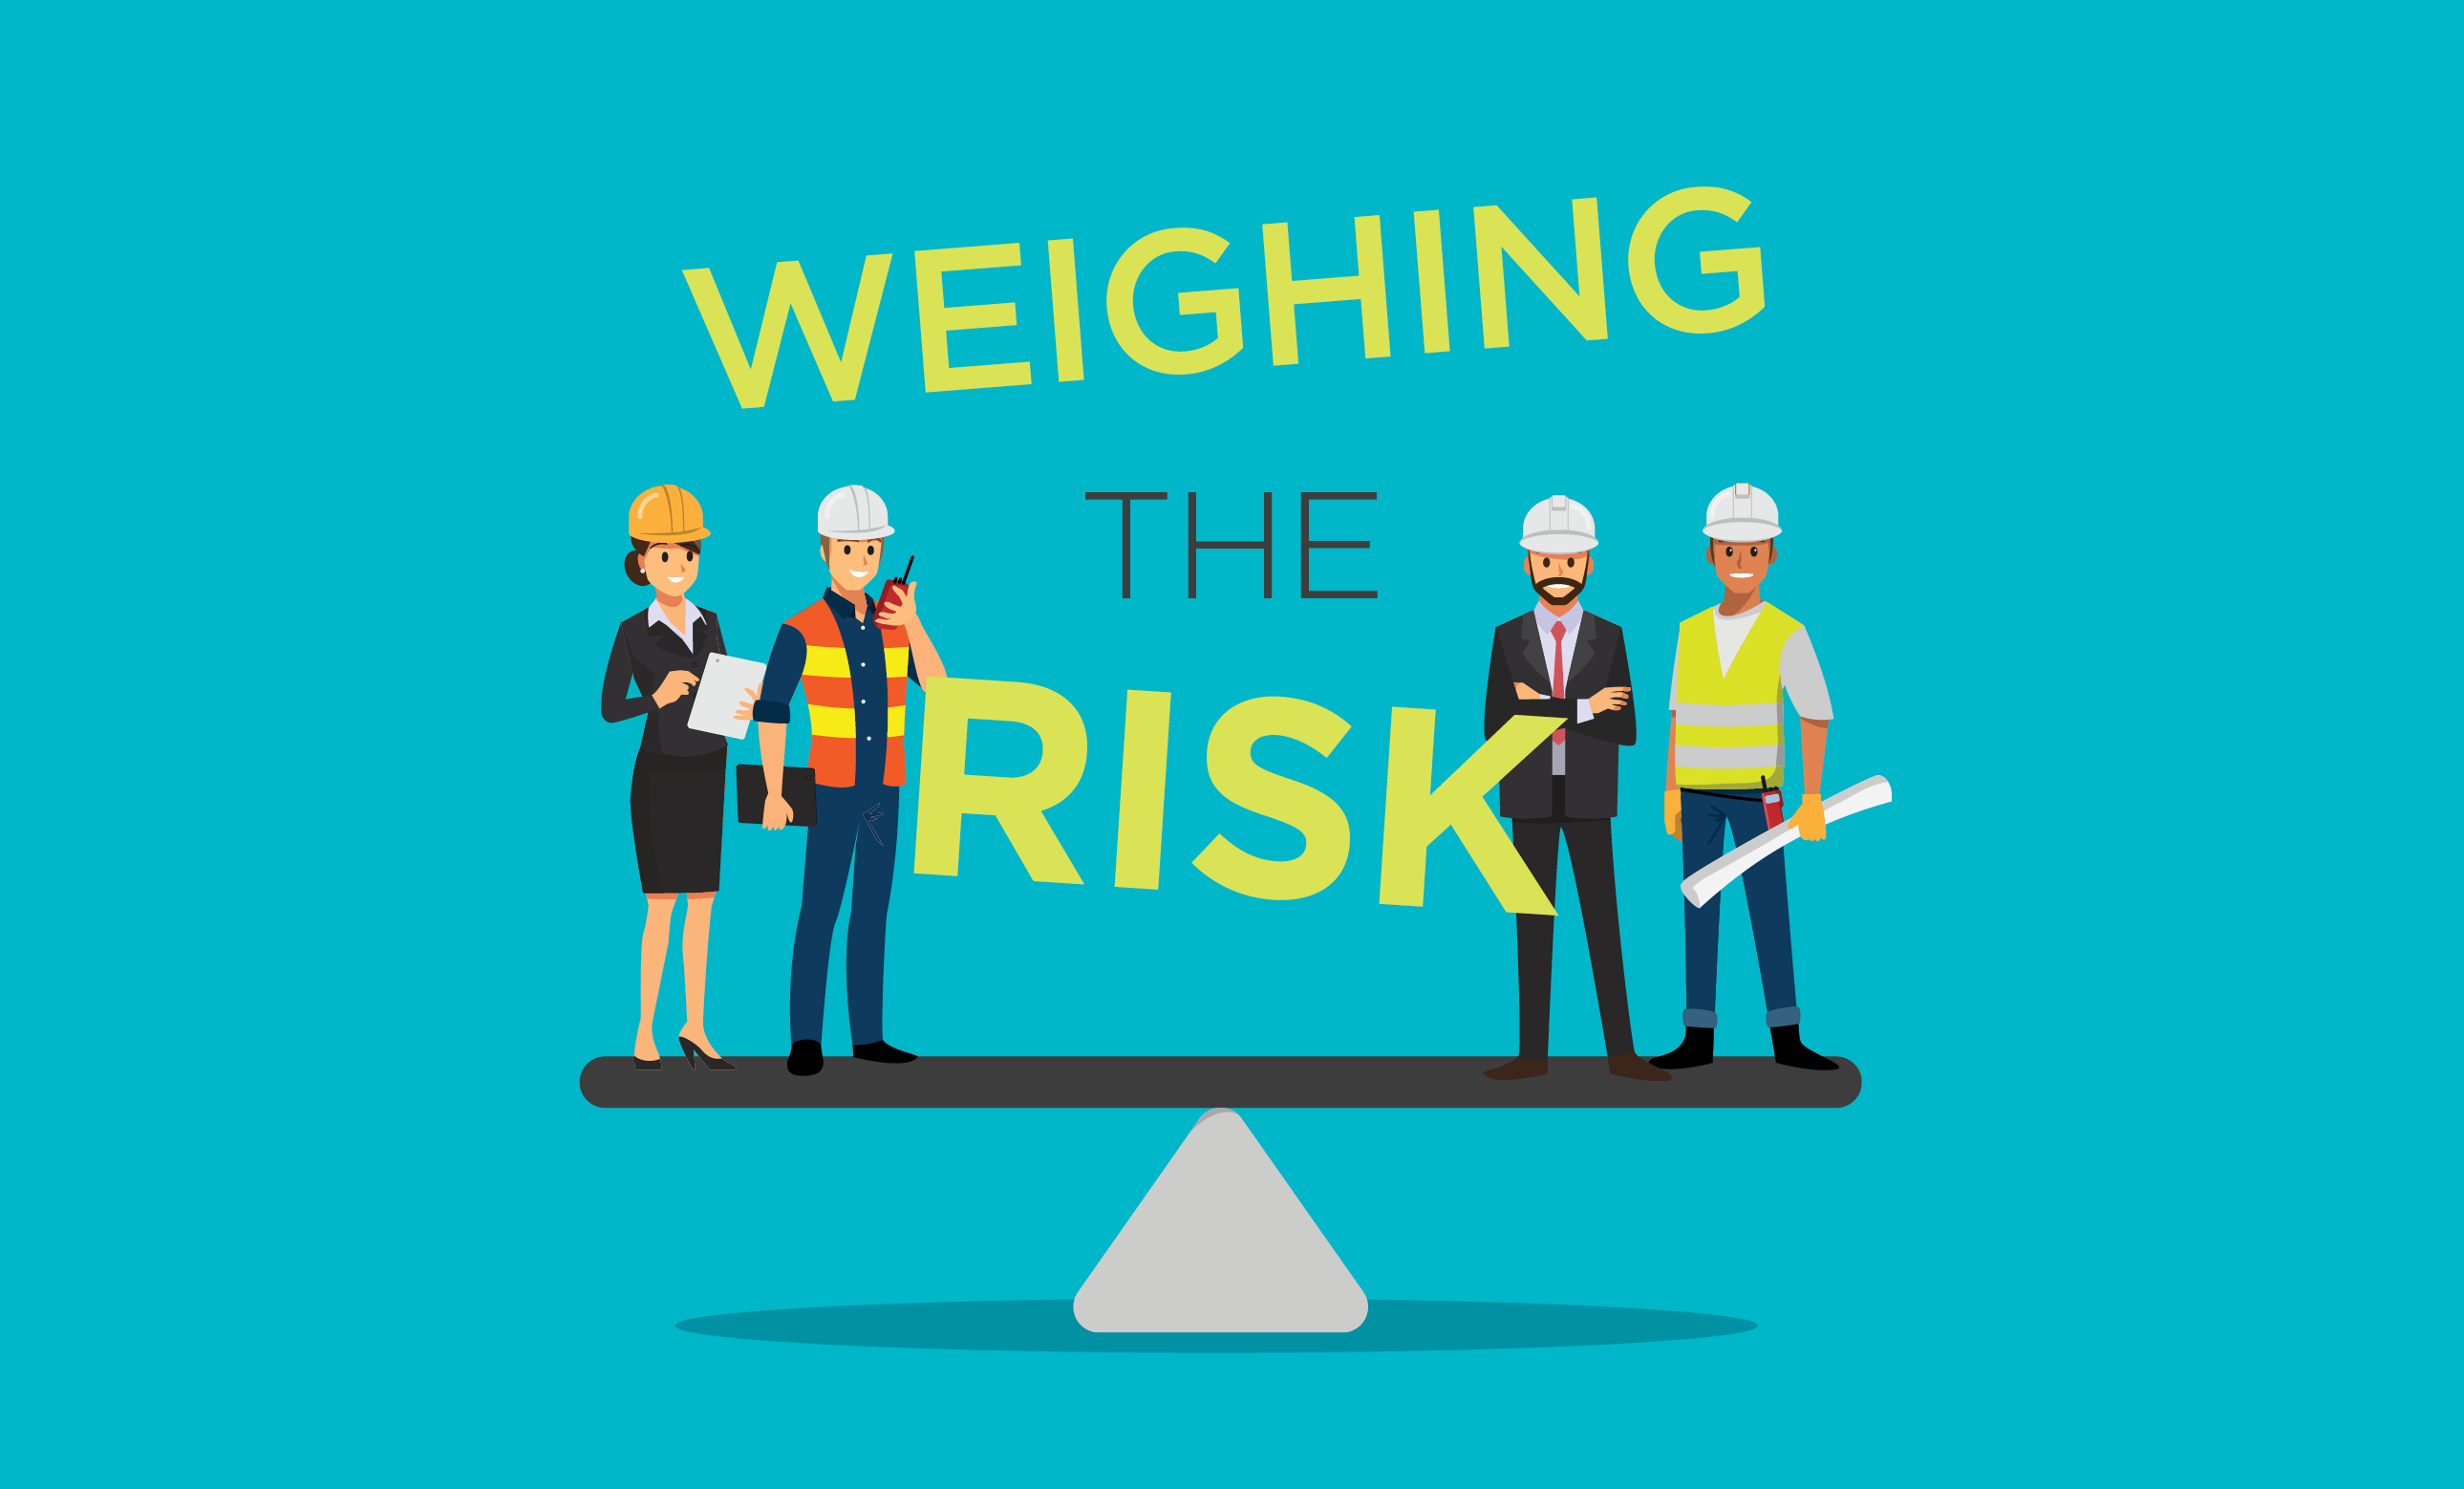 Weighing the risk - The benefits of hiring subcontractors varies among companies